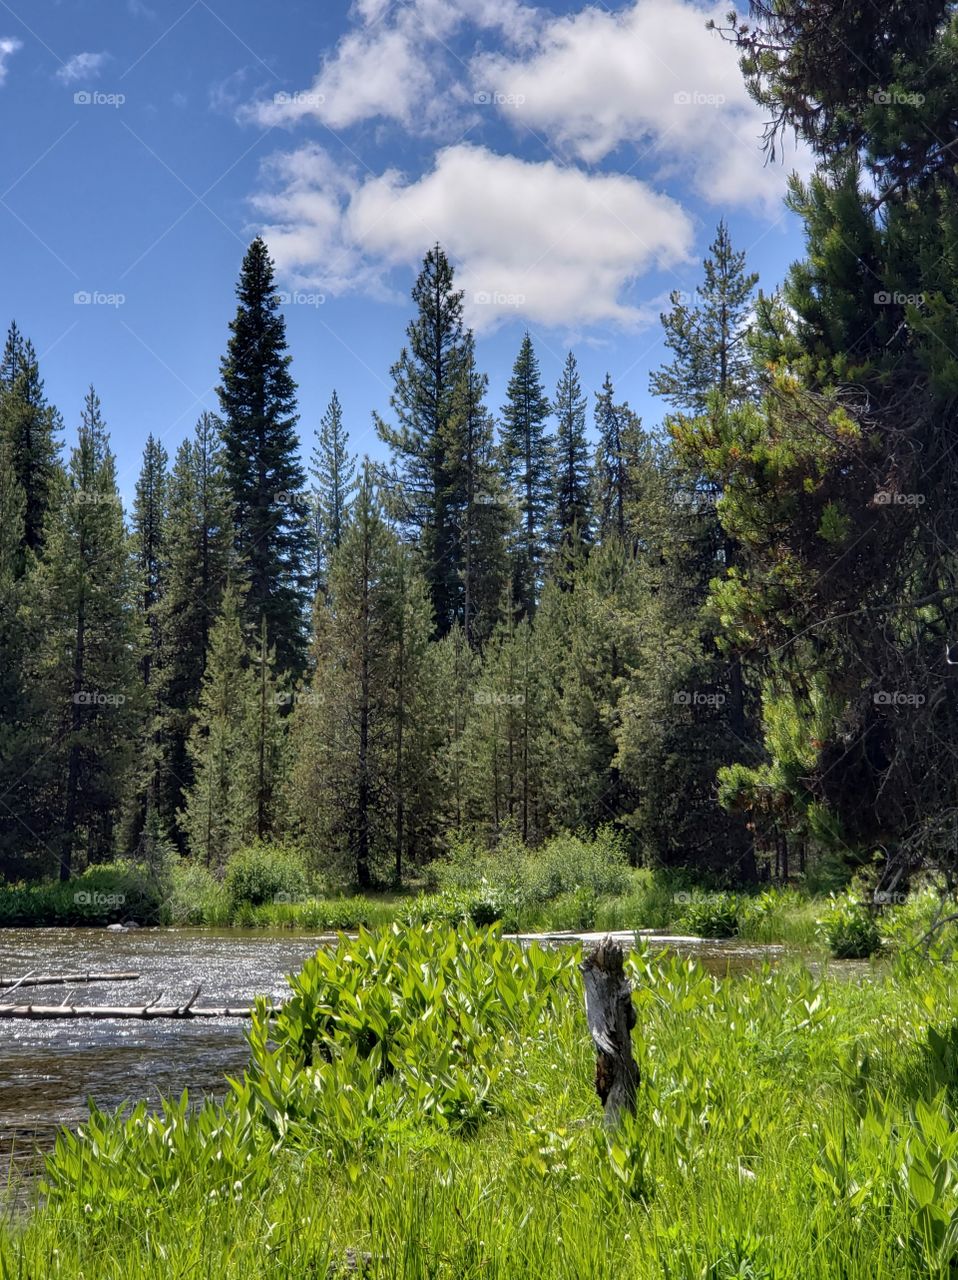 The Deschutes River flows through it's lush green banks in the beautiful forest on a sunny summer day with a bright blue sky and fluffy white clouds in Central Oregon.